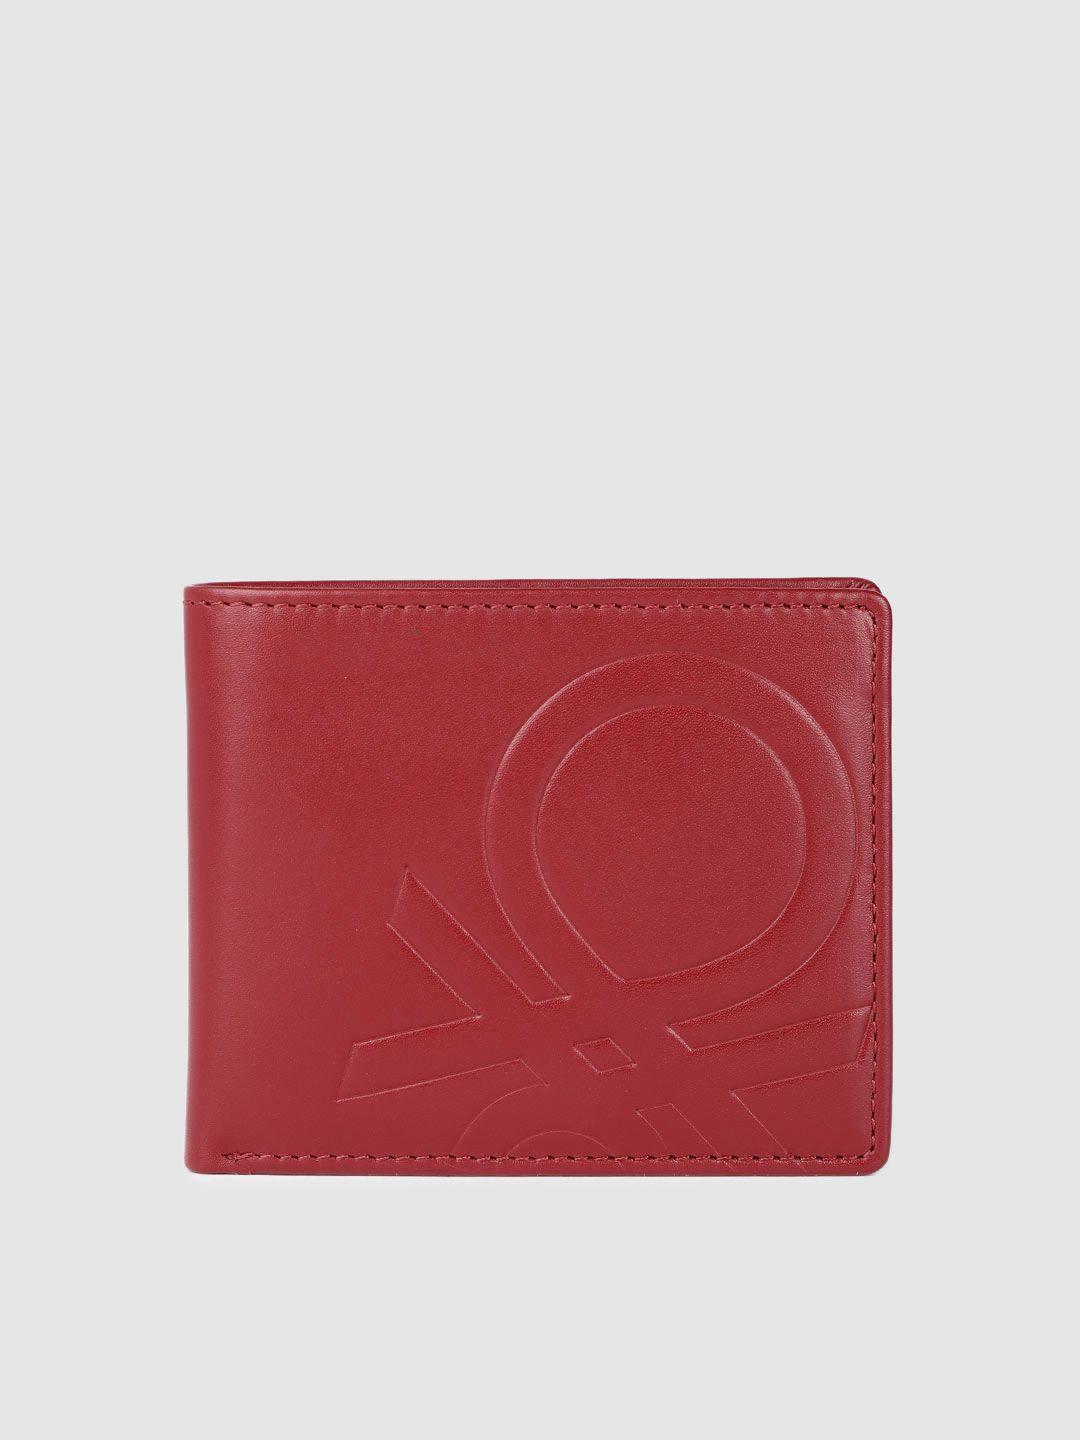 united colors of benetton men brand logo engraved leather two fold wallet